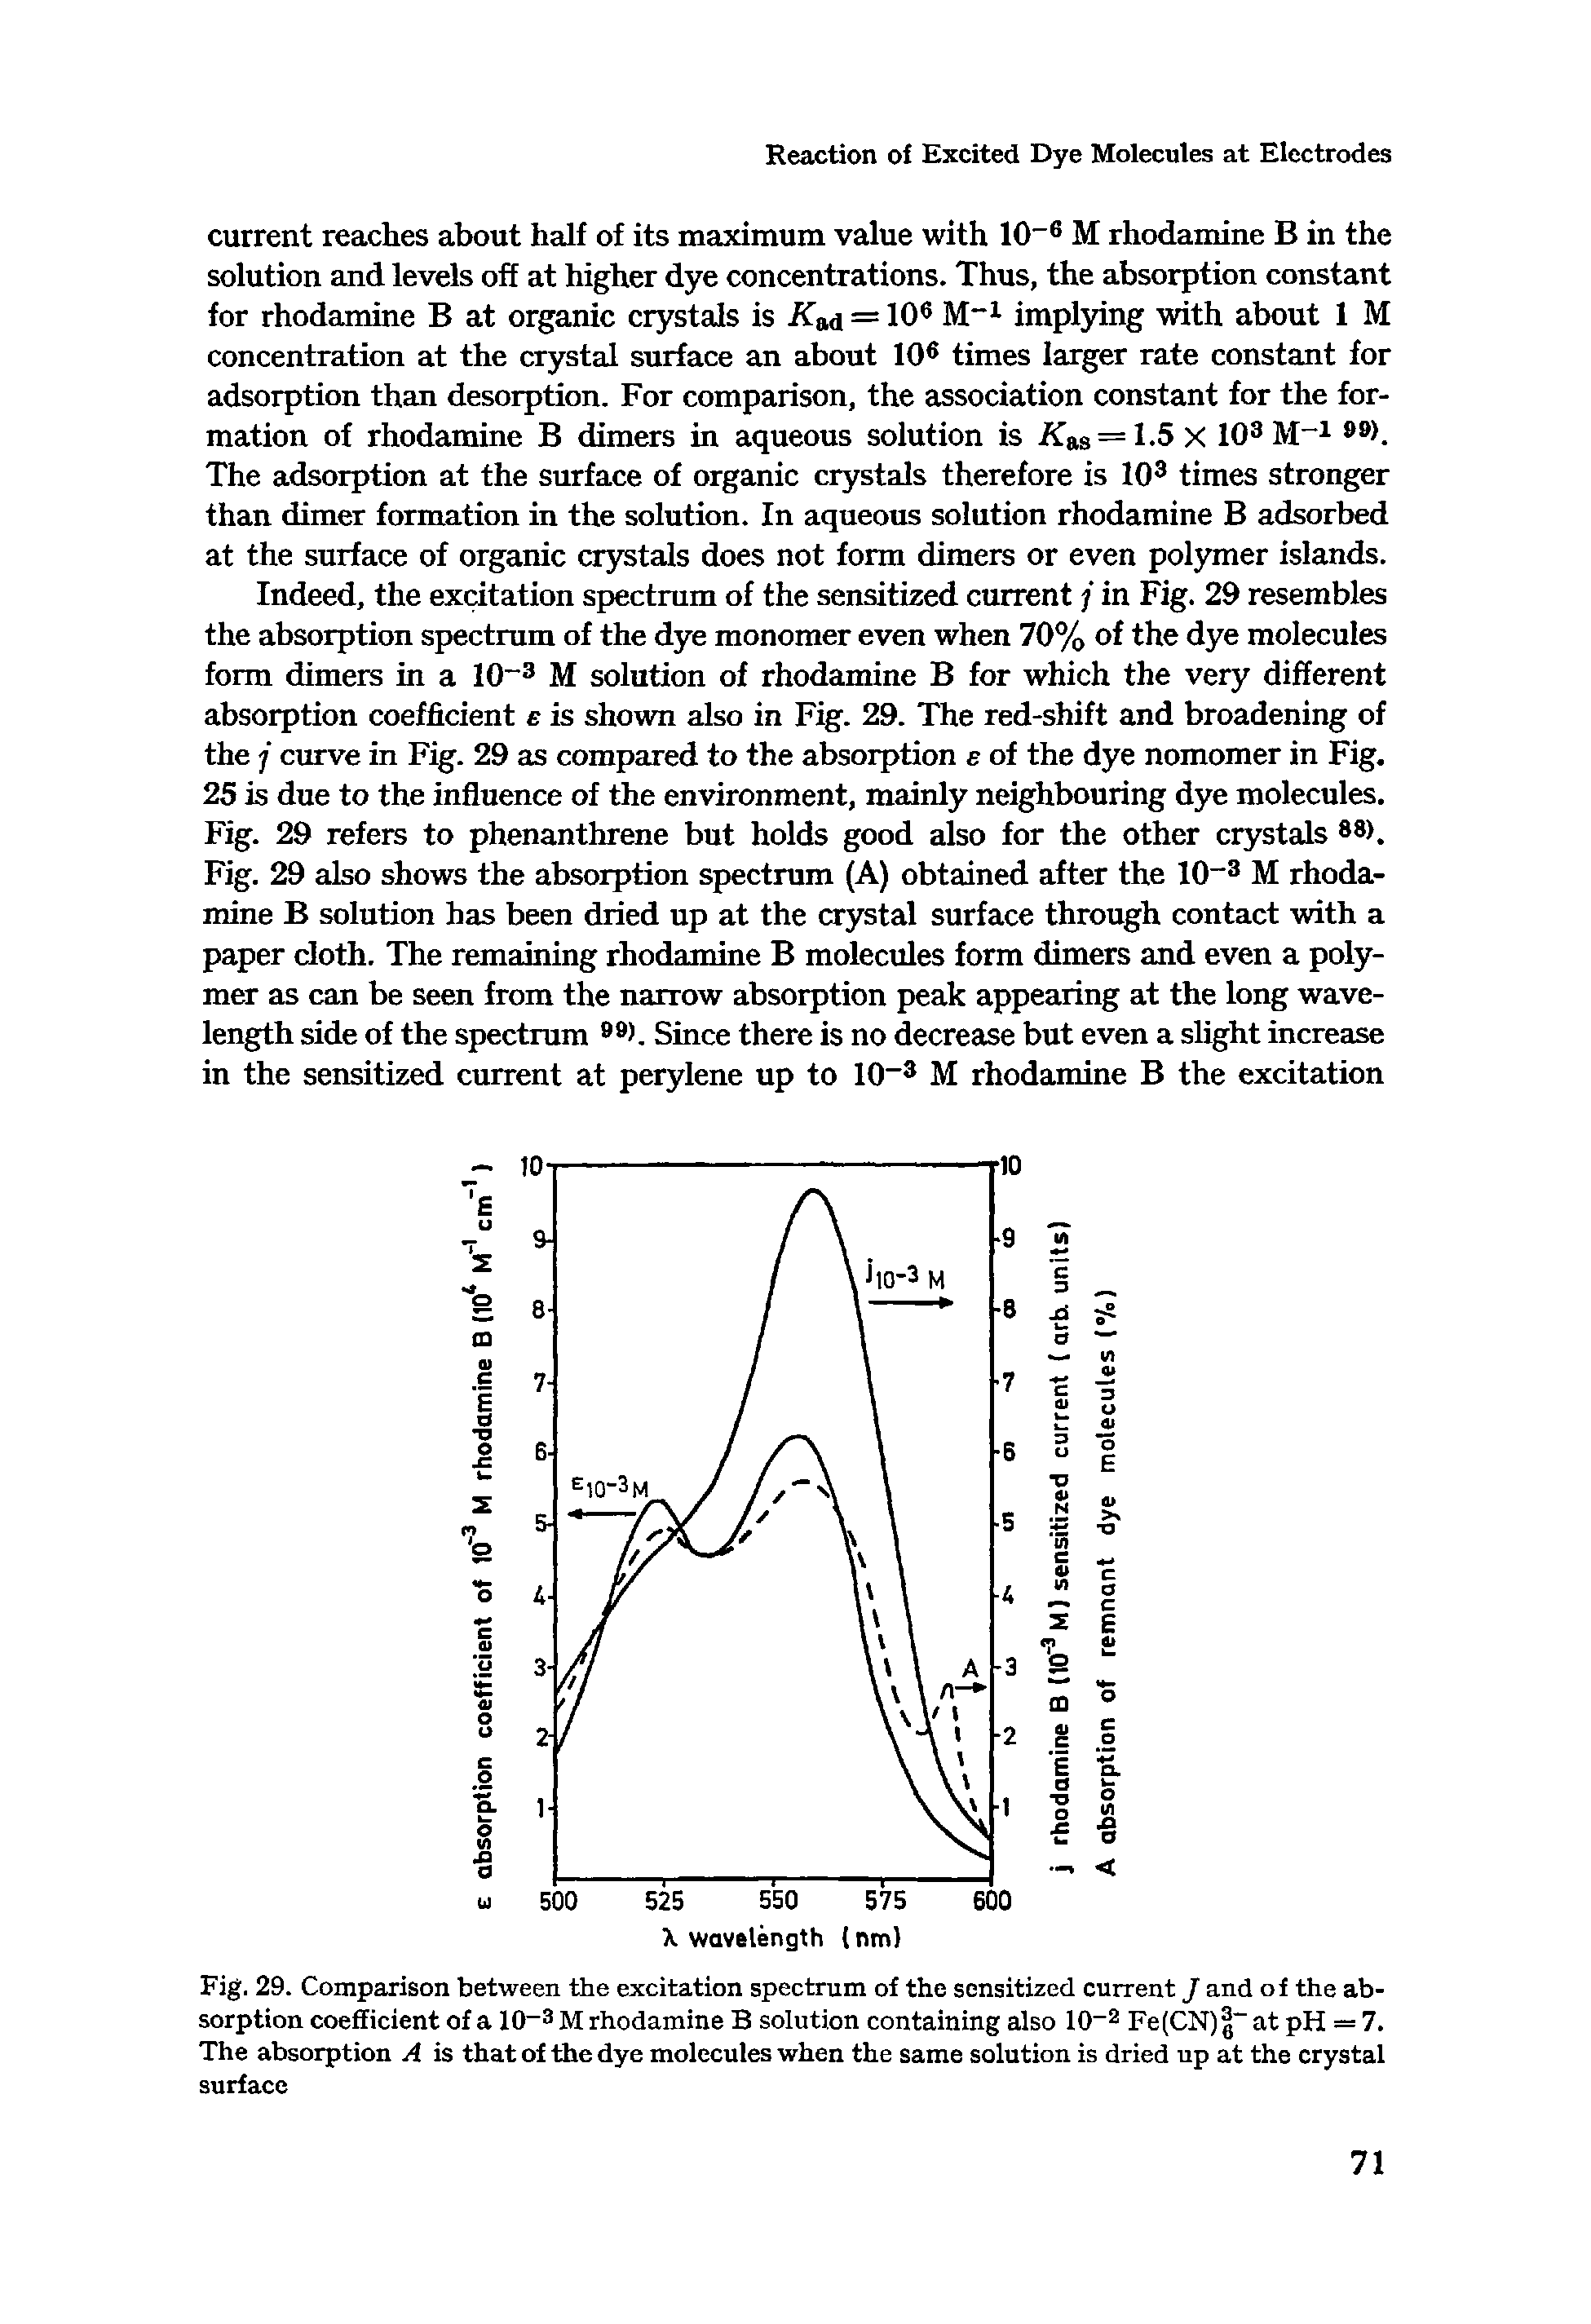 Fig. 29. Comparison between the excitation spectrum of the sensitized current J and of the absorption coefficient of a 10-3 M rhodamine solution containing also 10-2 Fe(CN) at pH — 7. The absorption A is that of the dye molecules when the same solution is dried up at the crystal surface...